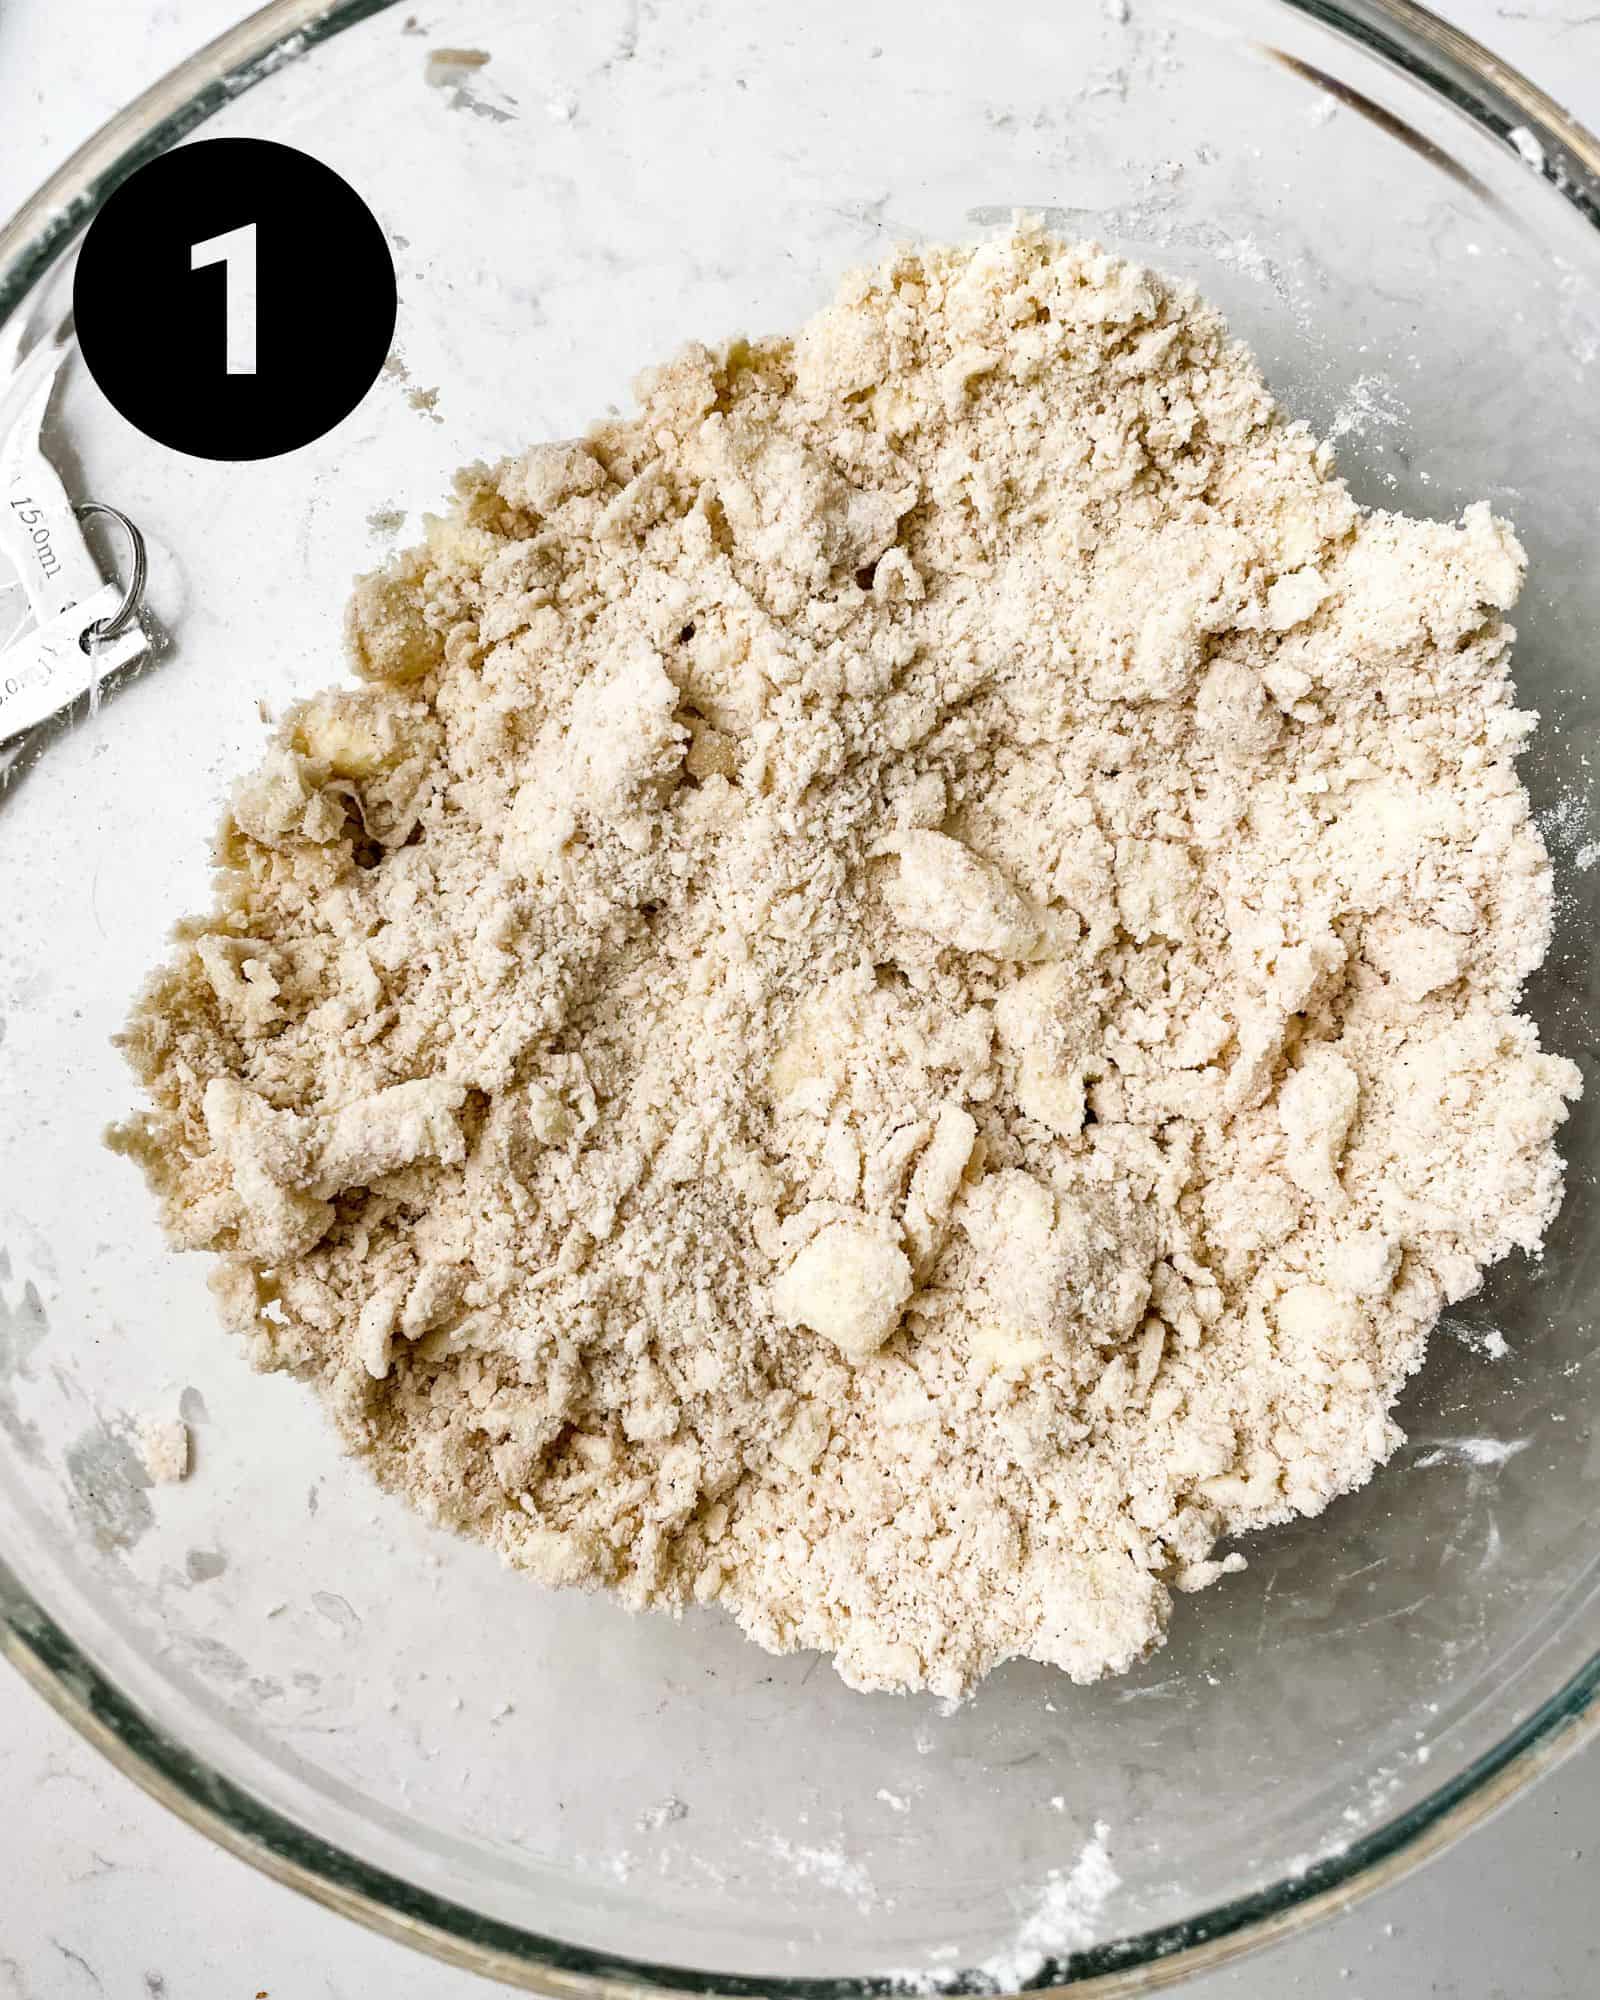 flour, sugar, salt, and butter mixed together in a bowl to create the flaky pie crust.